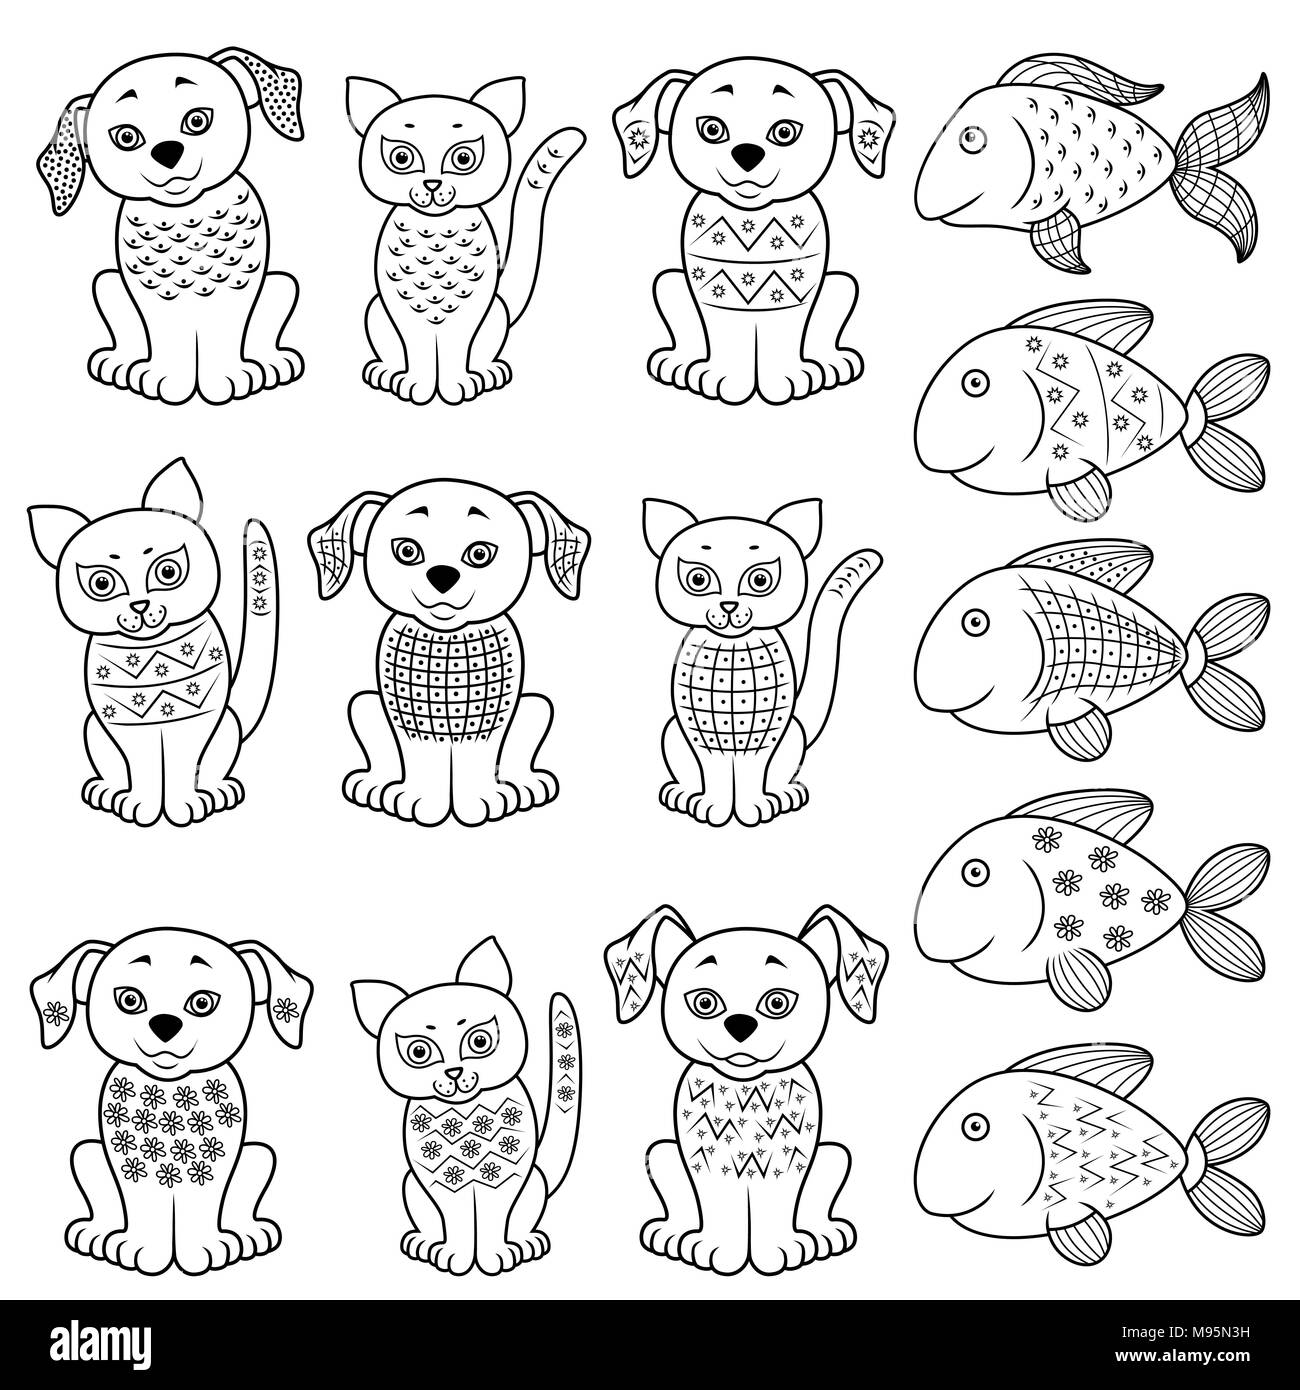 Set of amusing cartoon cats, dogs and fishes with various decorative design elements, hand drawing vector illustration Stock Vector